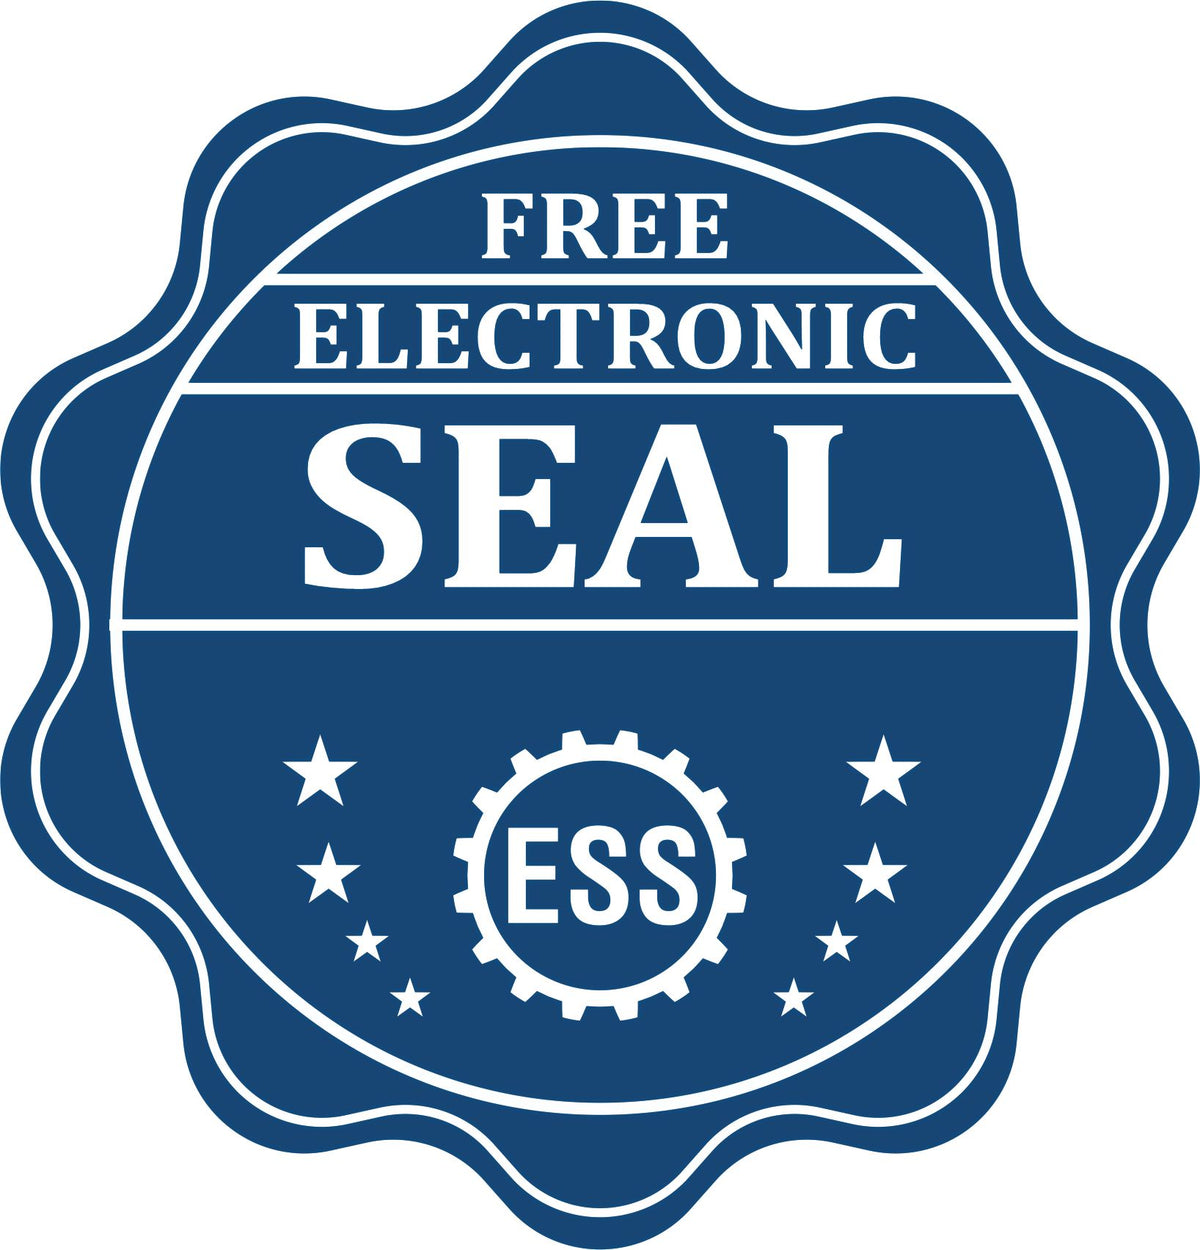 A badge showing a free electronic seal for the Hybrid Alaska Geologist Seal with stars and the ESS gear on the emblem.